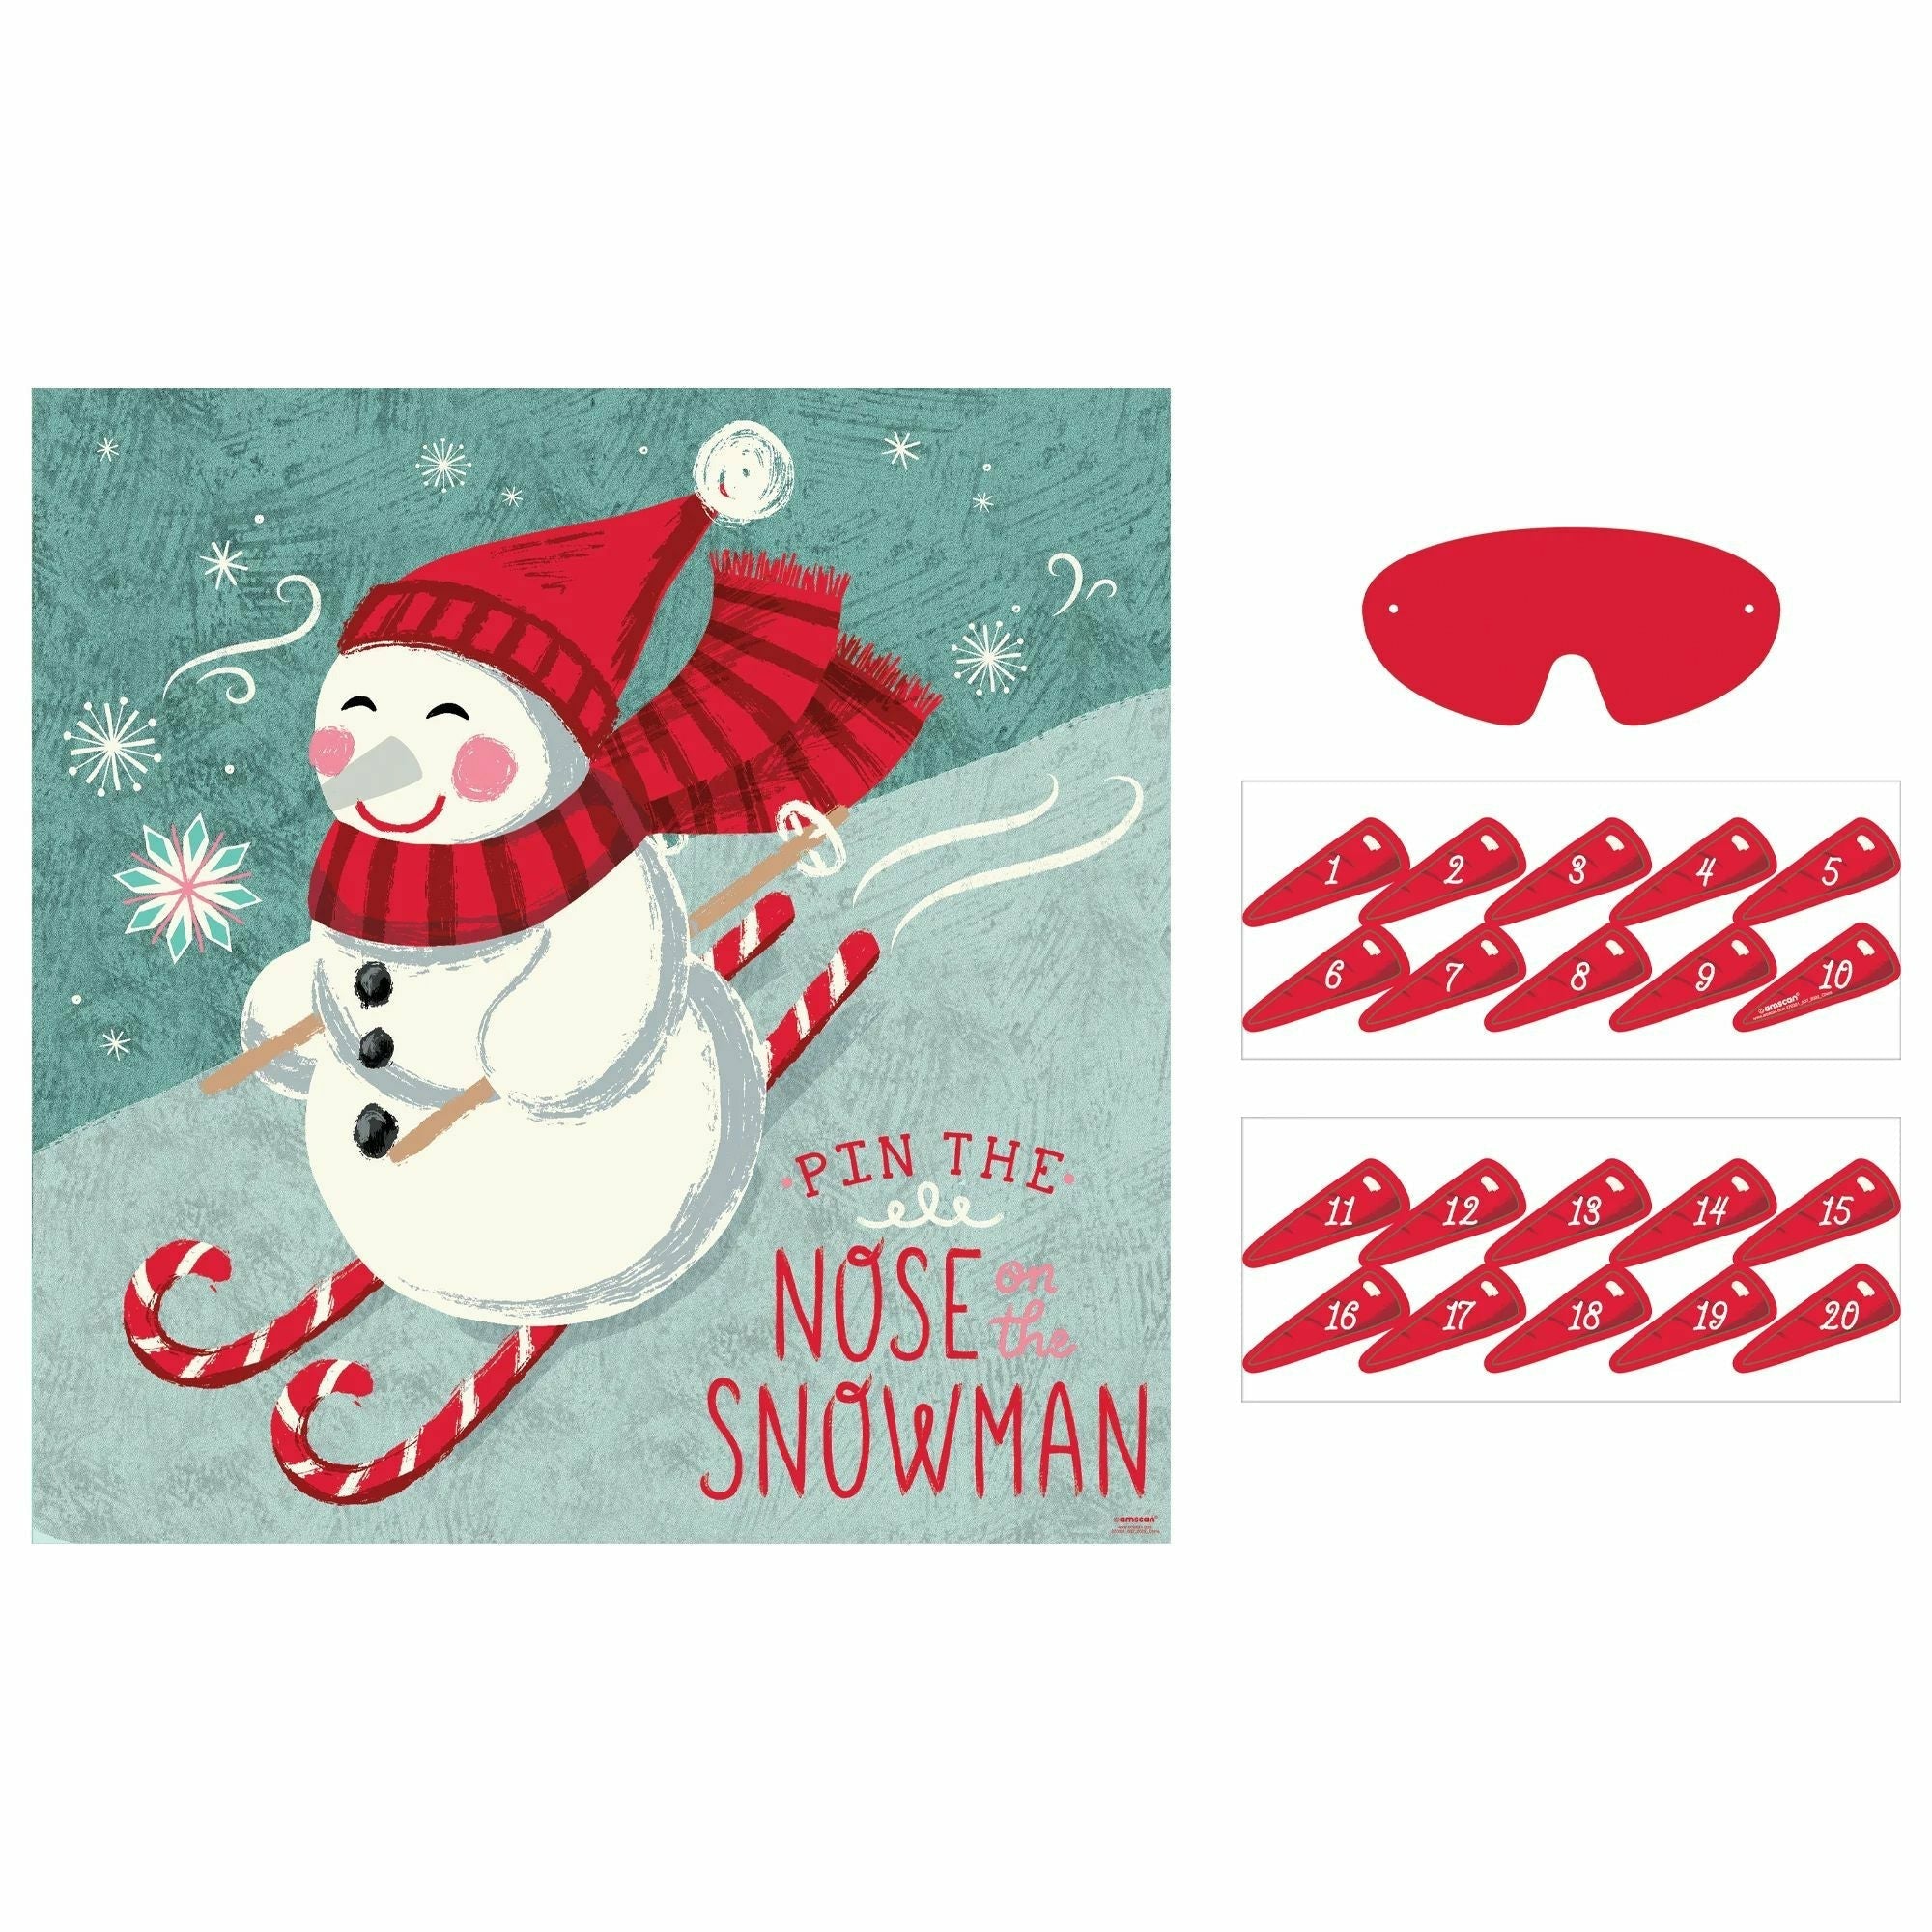 Amscan HOLIDAY: CHRISTMAS Peppermint Twist Pin the Nose on the Snowman